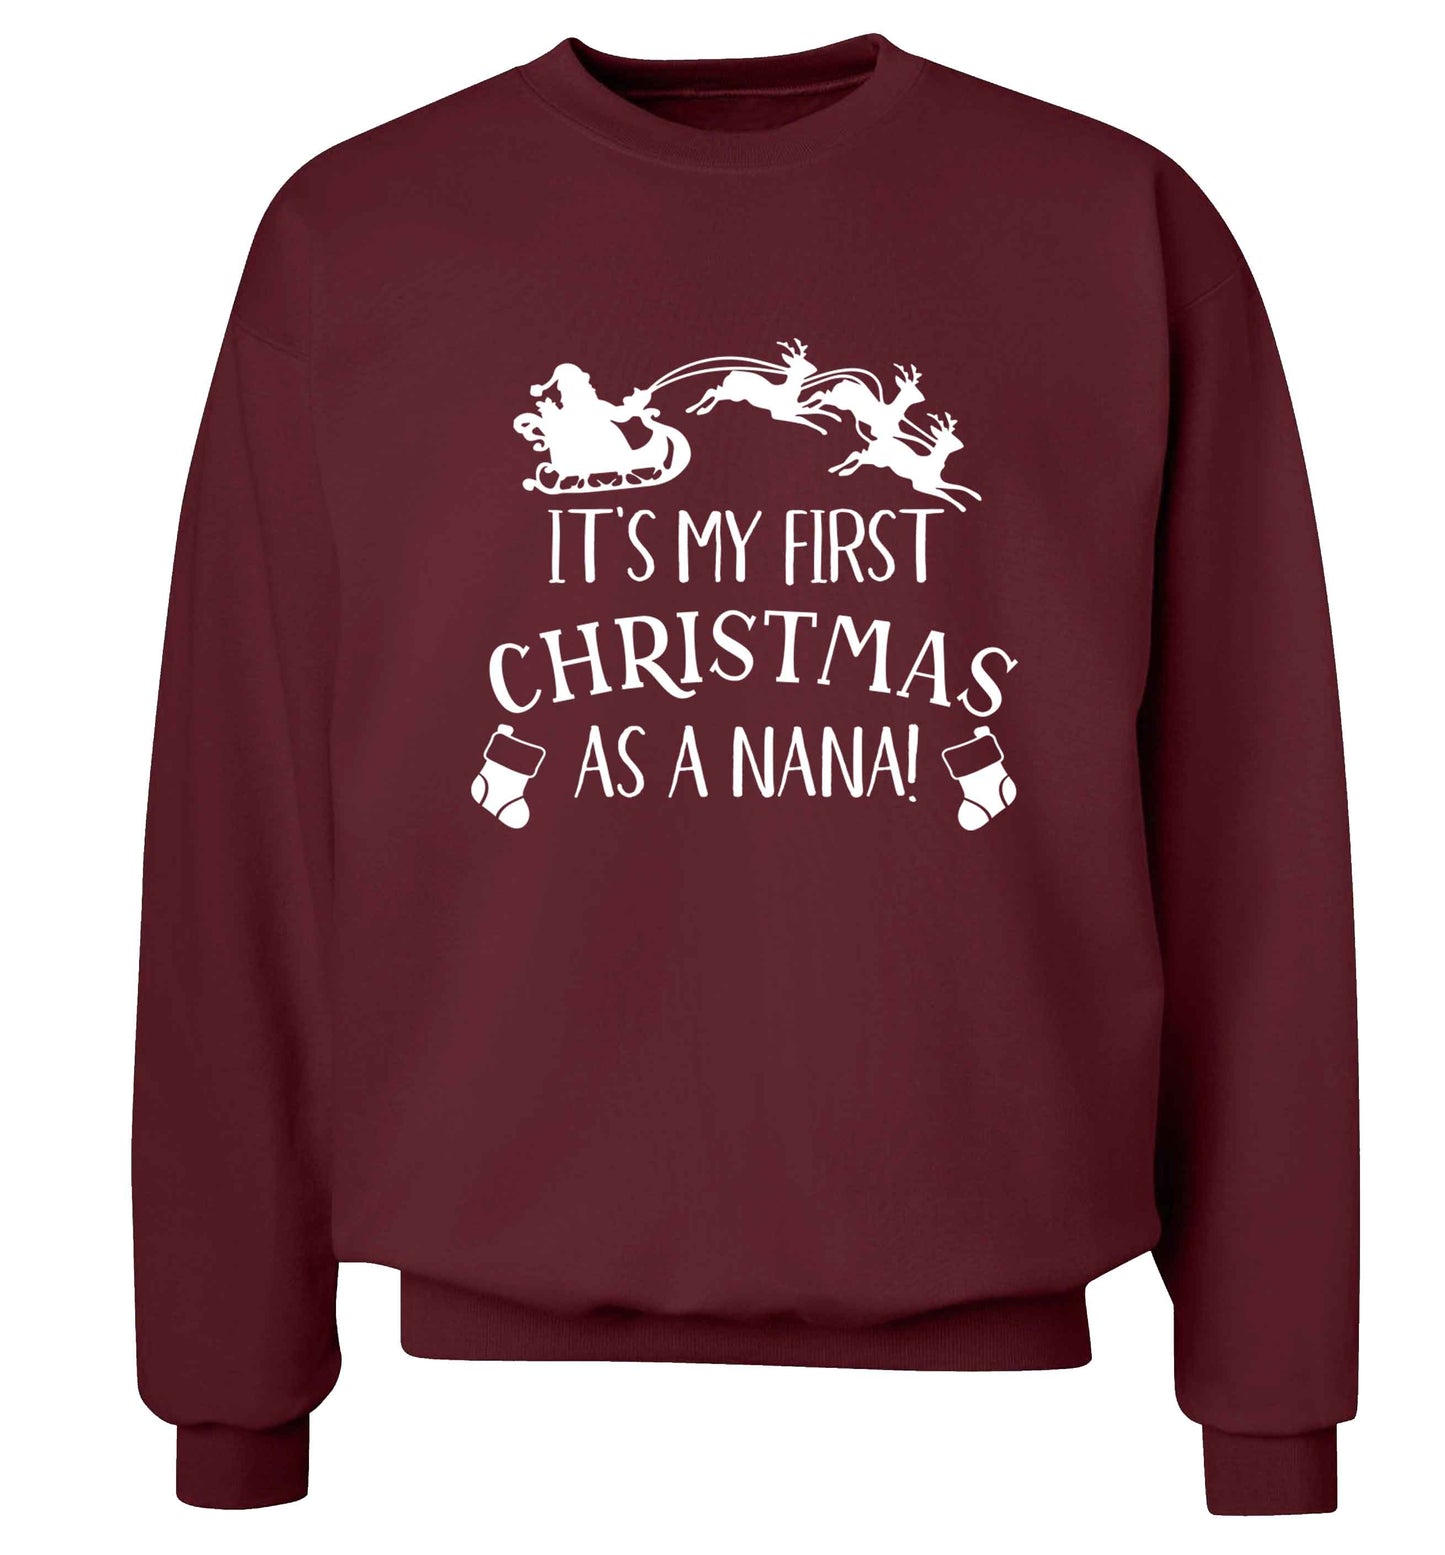 It's my first Christmas as a nana Adult's unisex maroon Sweater 2XL